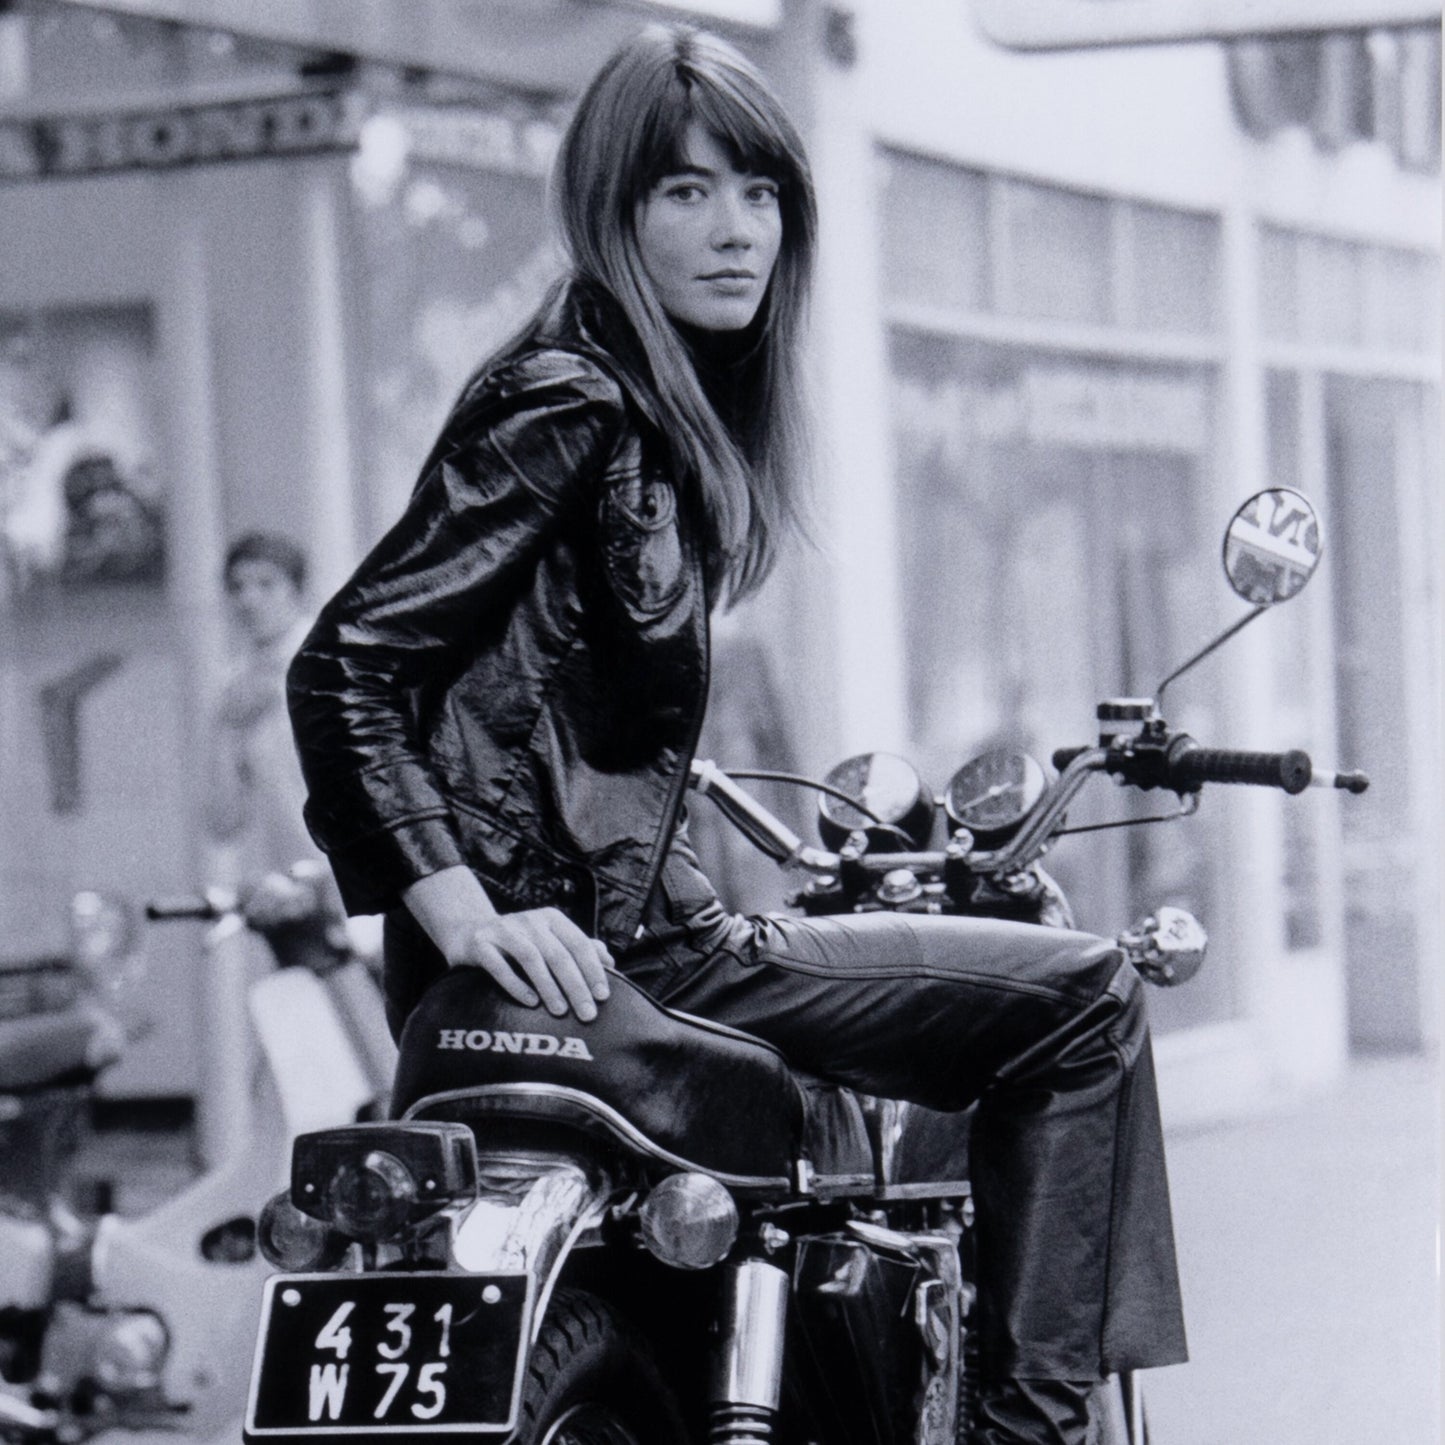 Françoise hardy on bike by getty images